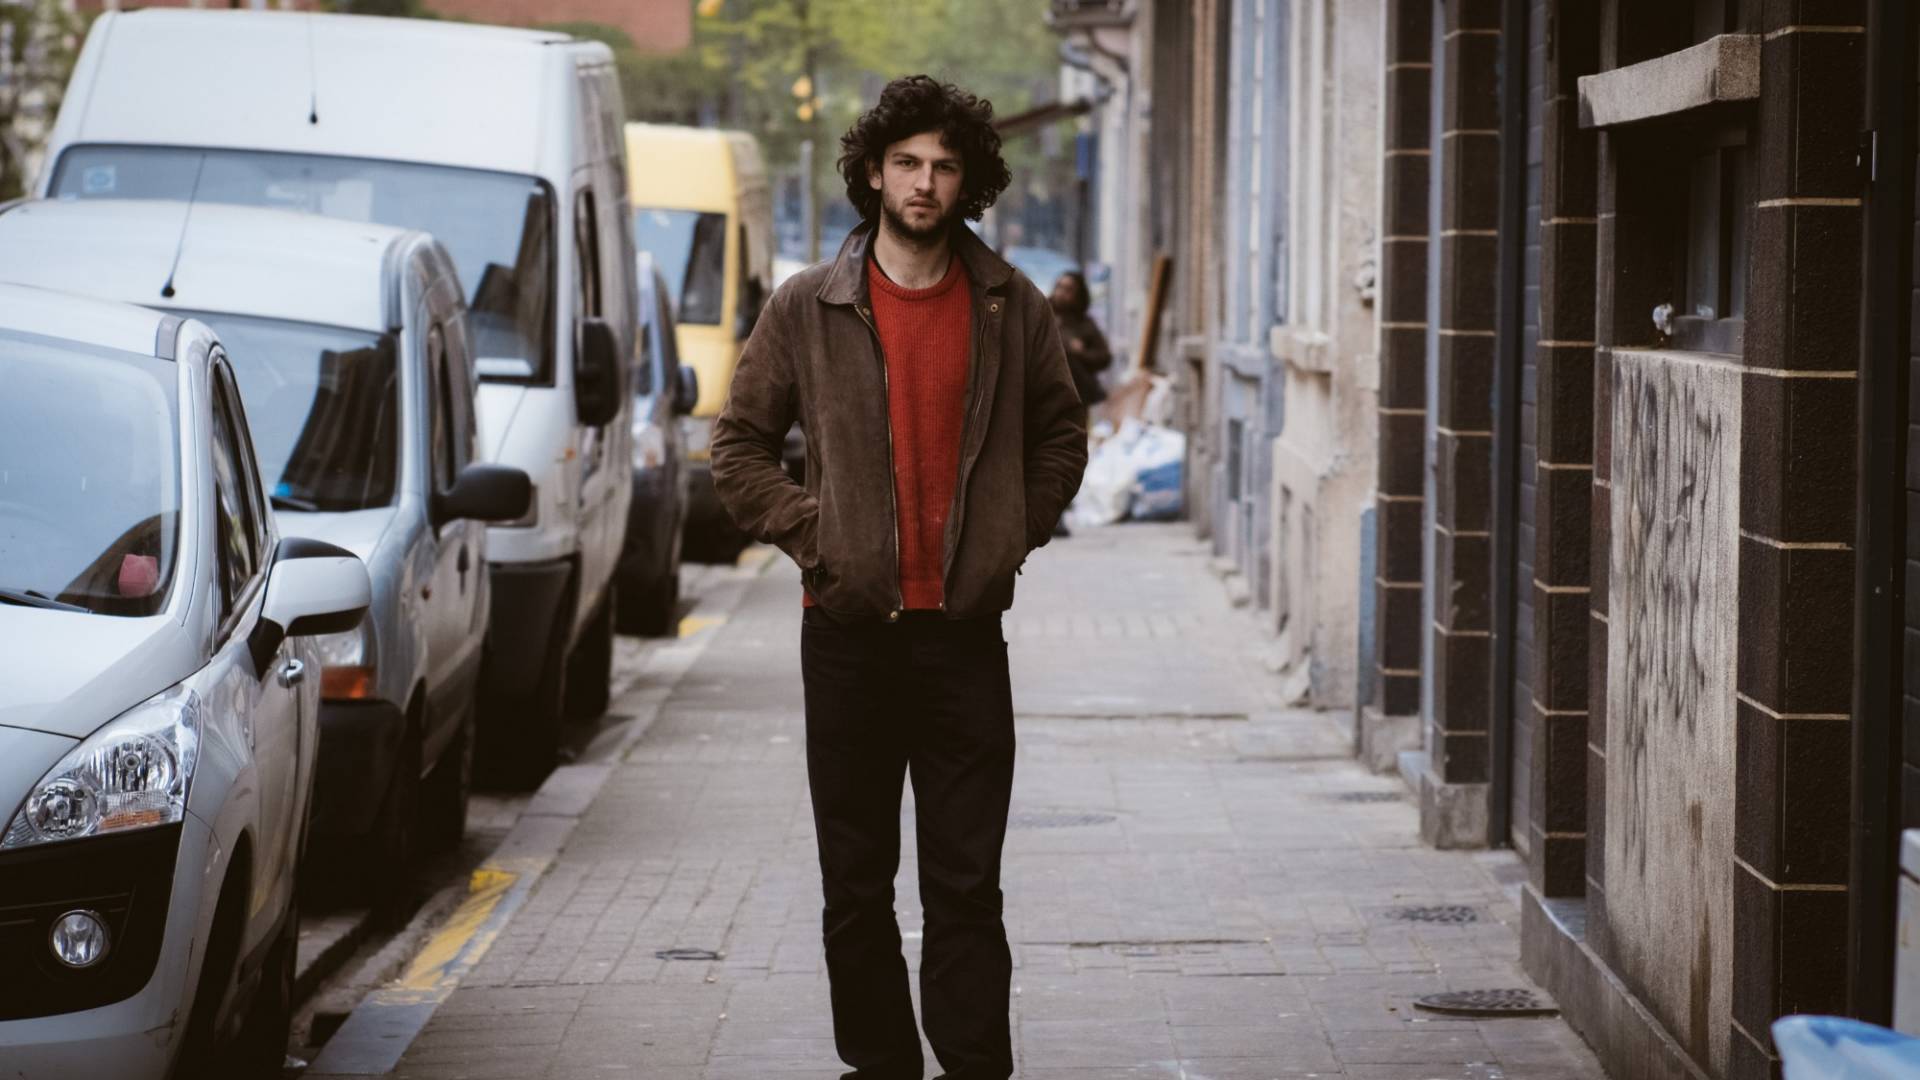 Andriu Deplazes strolls through the streets of Brussels, his hands in his jacket pockets.